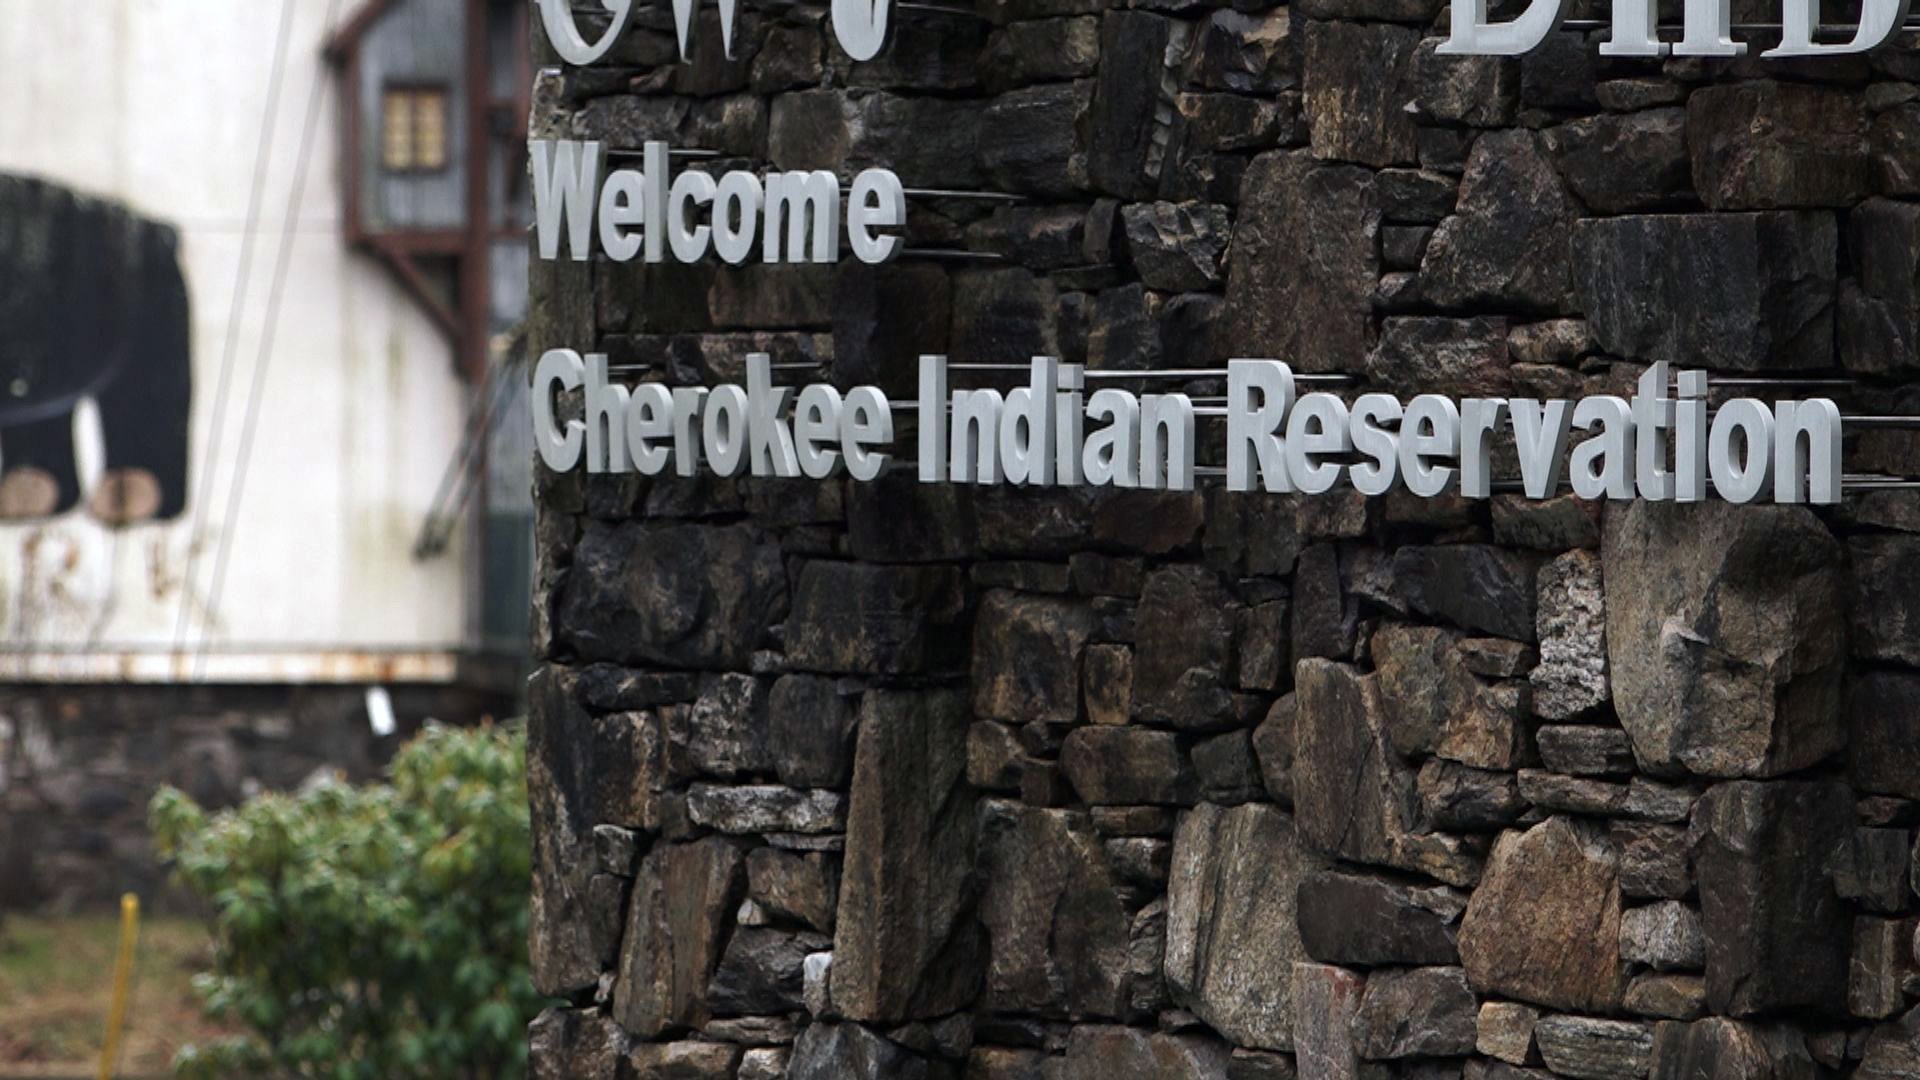 The chief of the Eastern Band of Cherokee Indians says in around 3 months, they'll have formal ideas for how to develop a prime piece of real estate in Sevier Co.